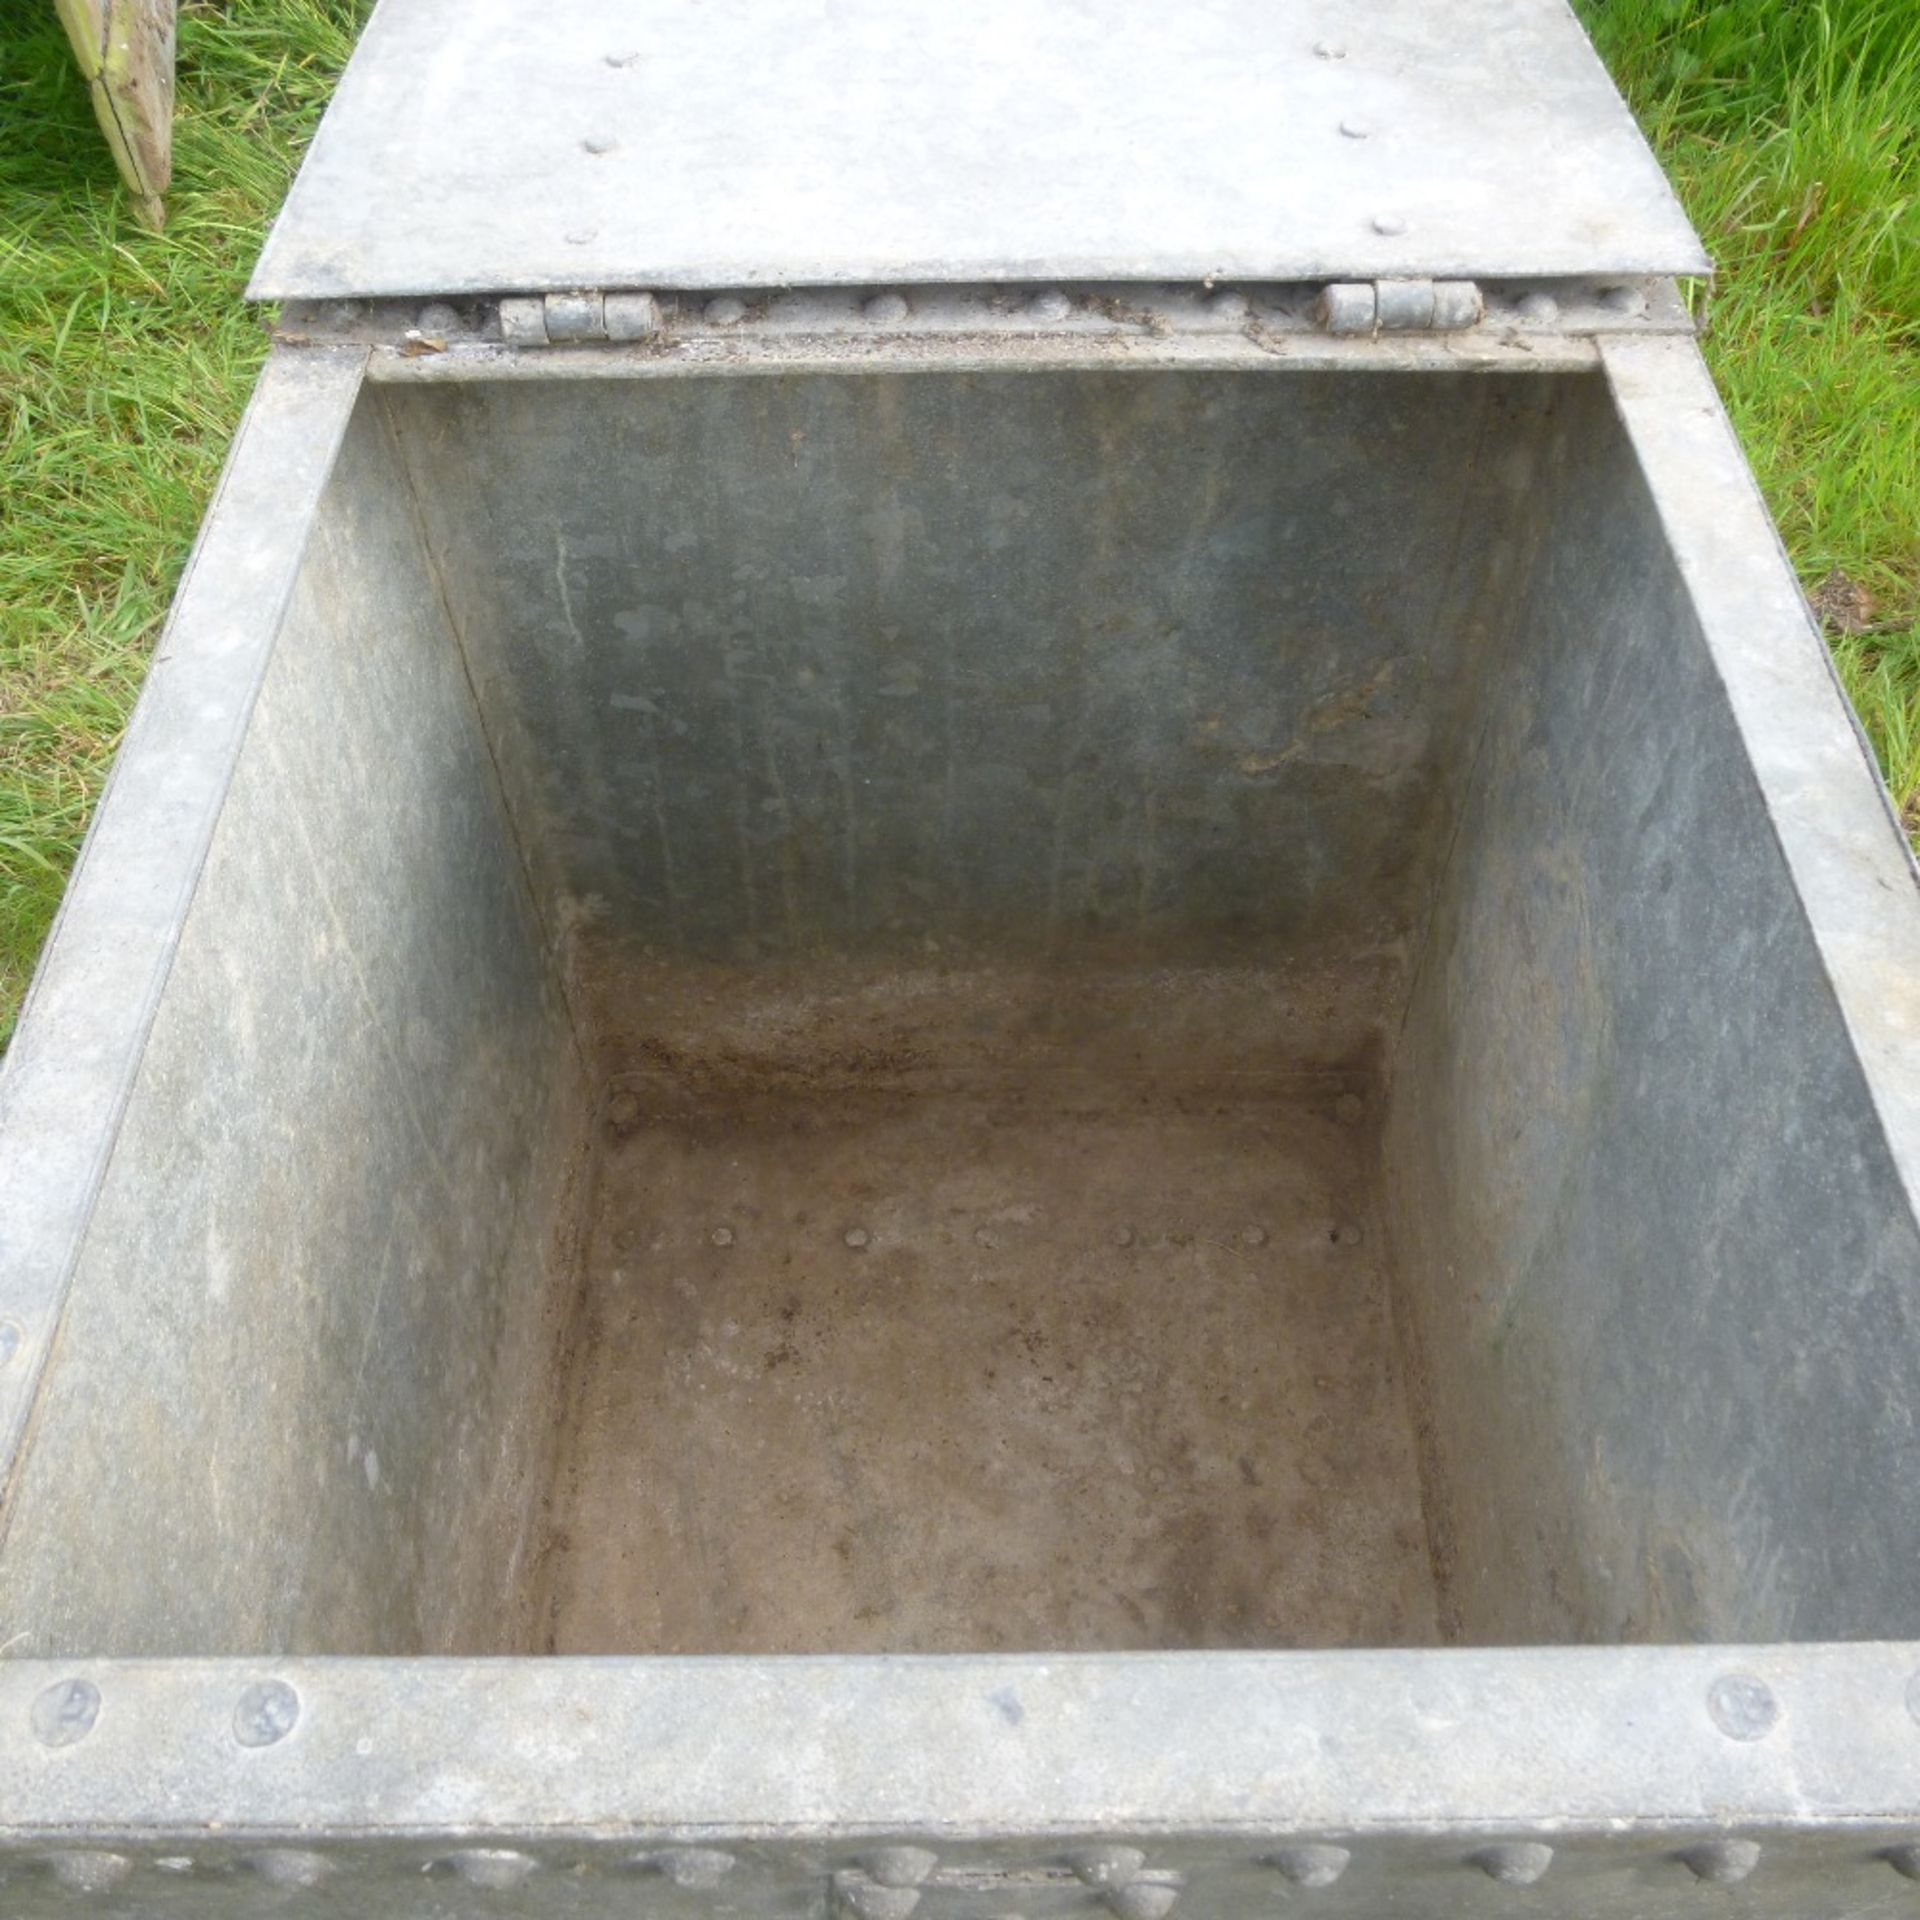 Galvanised feed bin on iron wheels, width 63cm, depth 77cm, height 82cm, in good condition. - Image 4 of 4